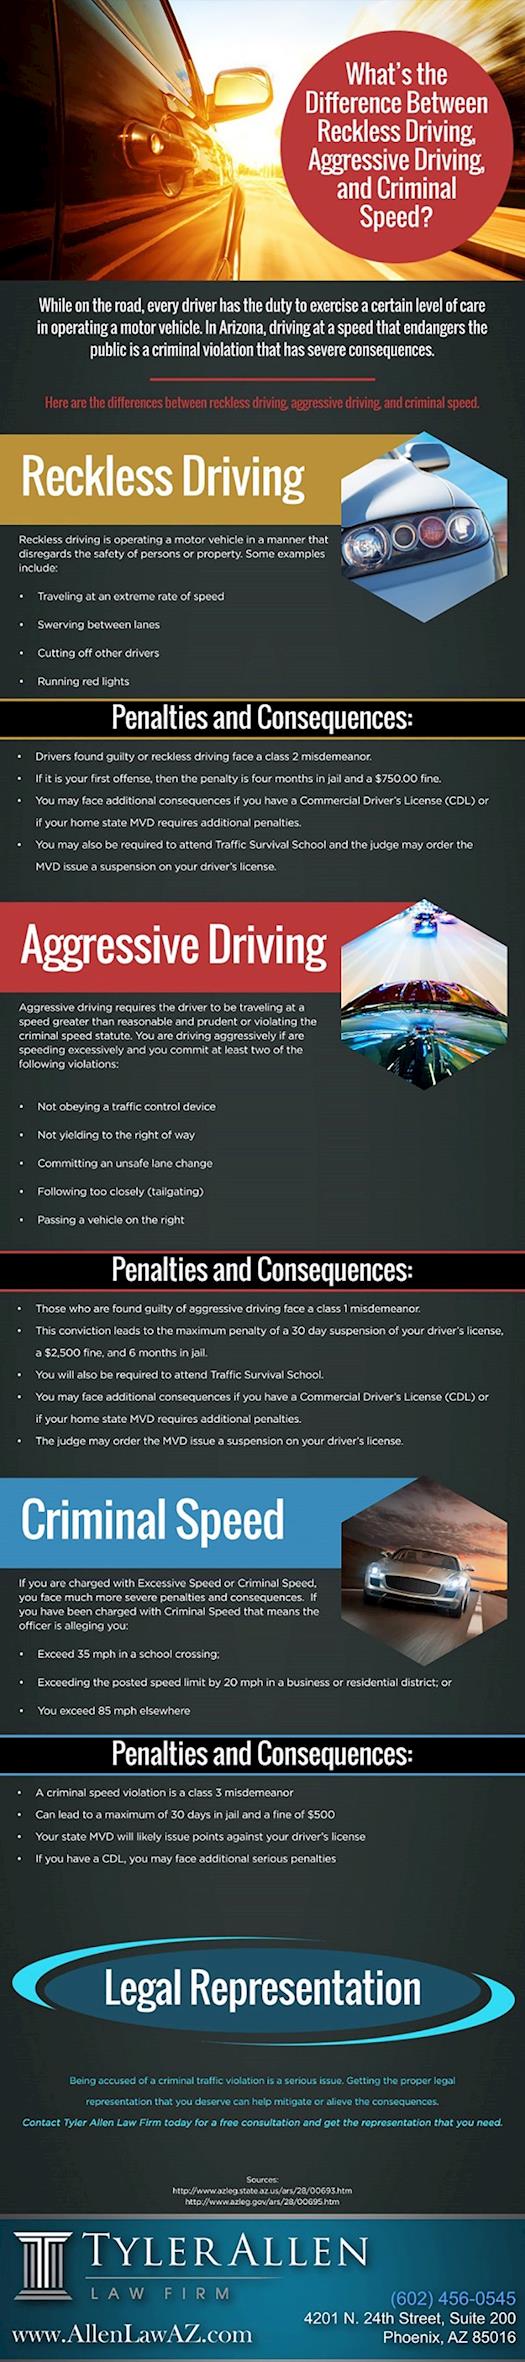  What’s Difference between Reckless Driving, Aggressive Driving, and Criminal Speed?